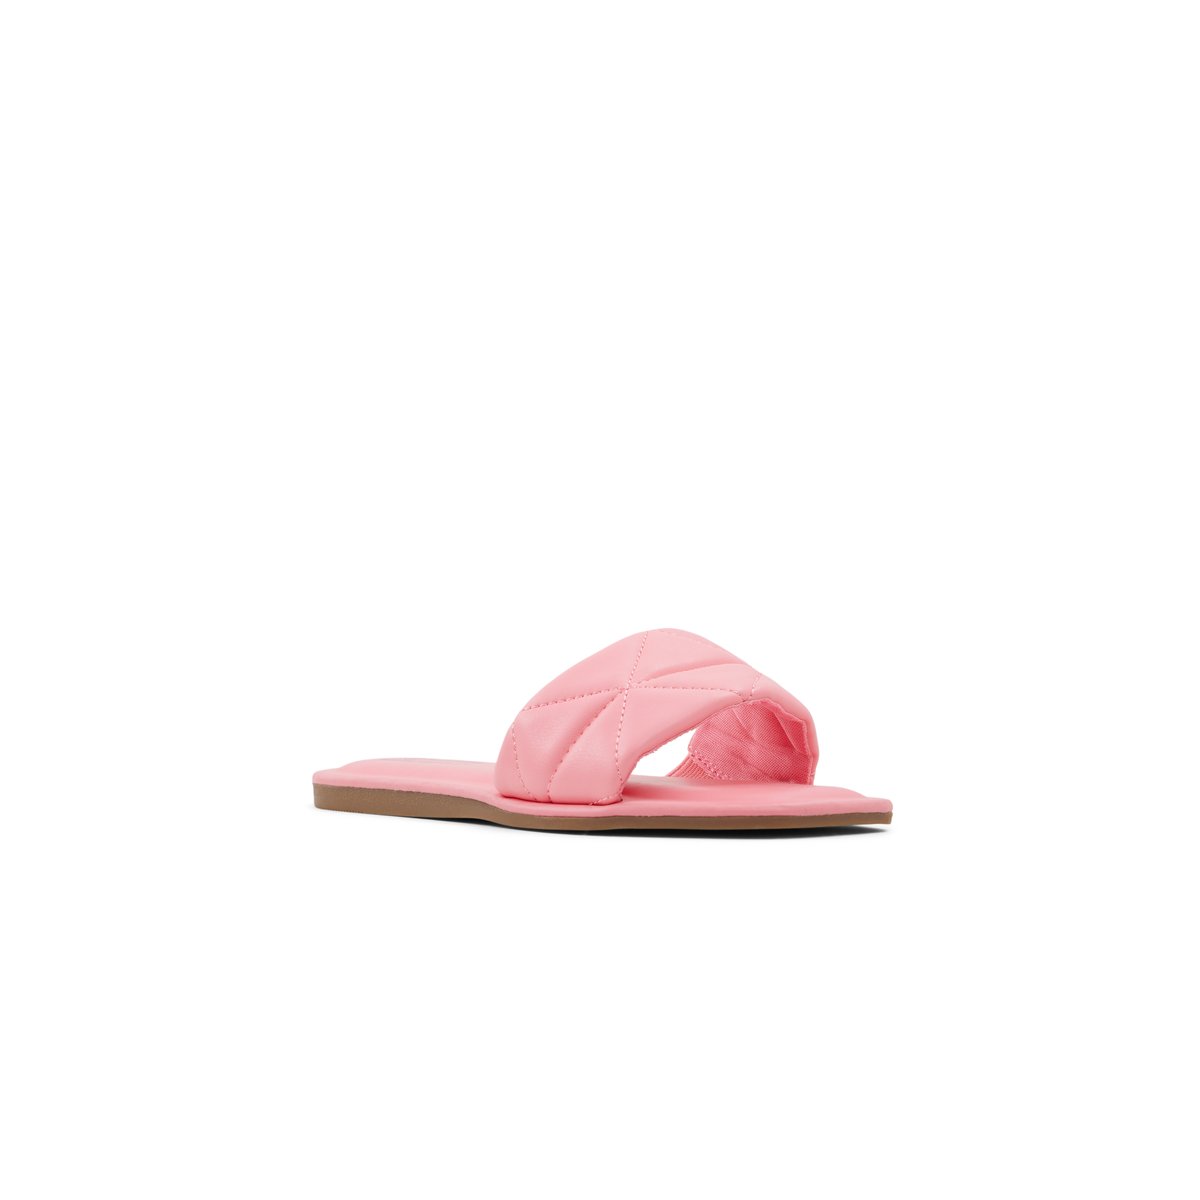 Avril Women Shoes - Bright Pink - CALL IT SPRING KSA